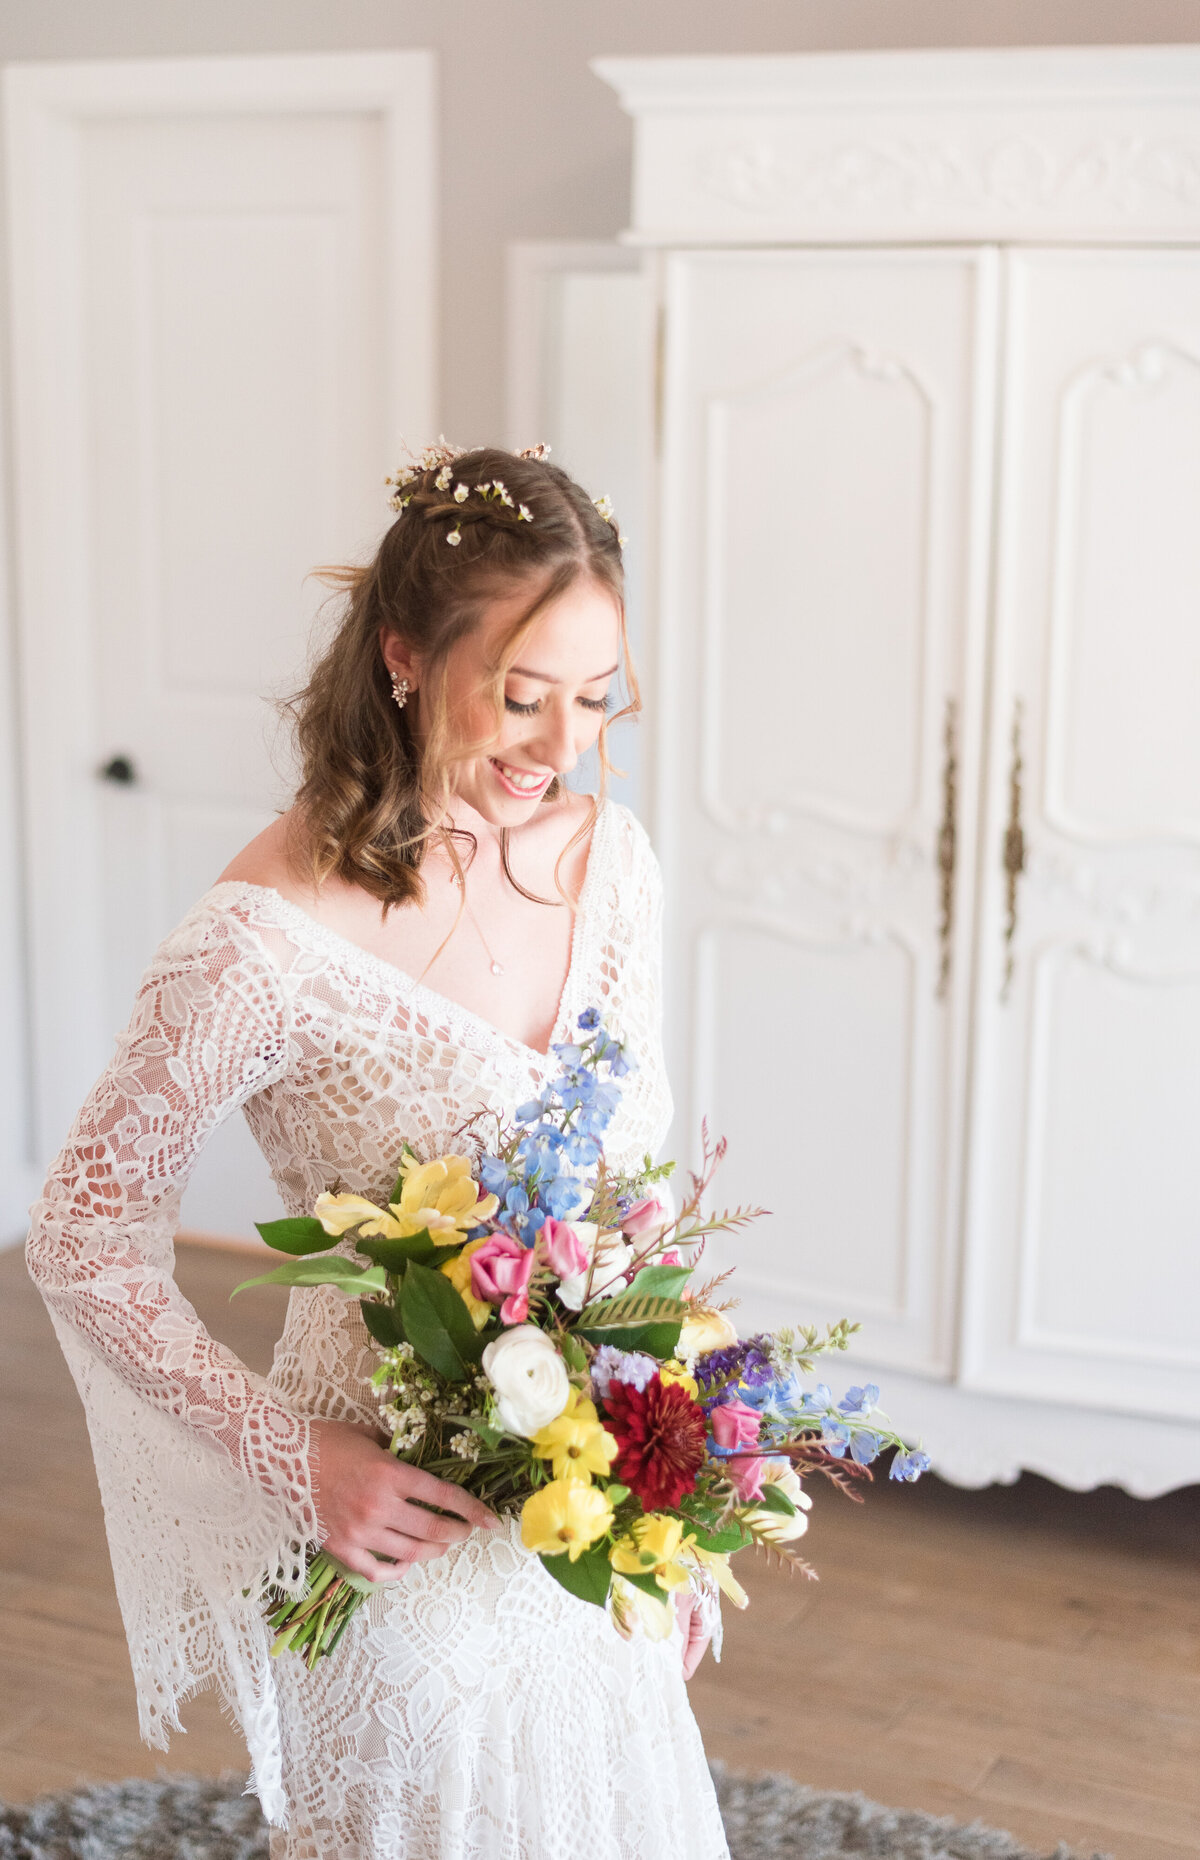 bridal portrait of bride in a lace boho wedding dress in her bridal suite holding her bright and colorful floral bouquet as she smiles while looking down at her wedding flowers